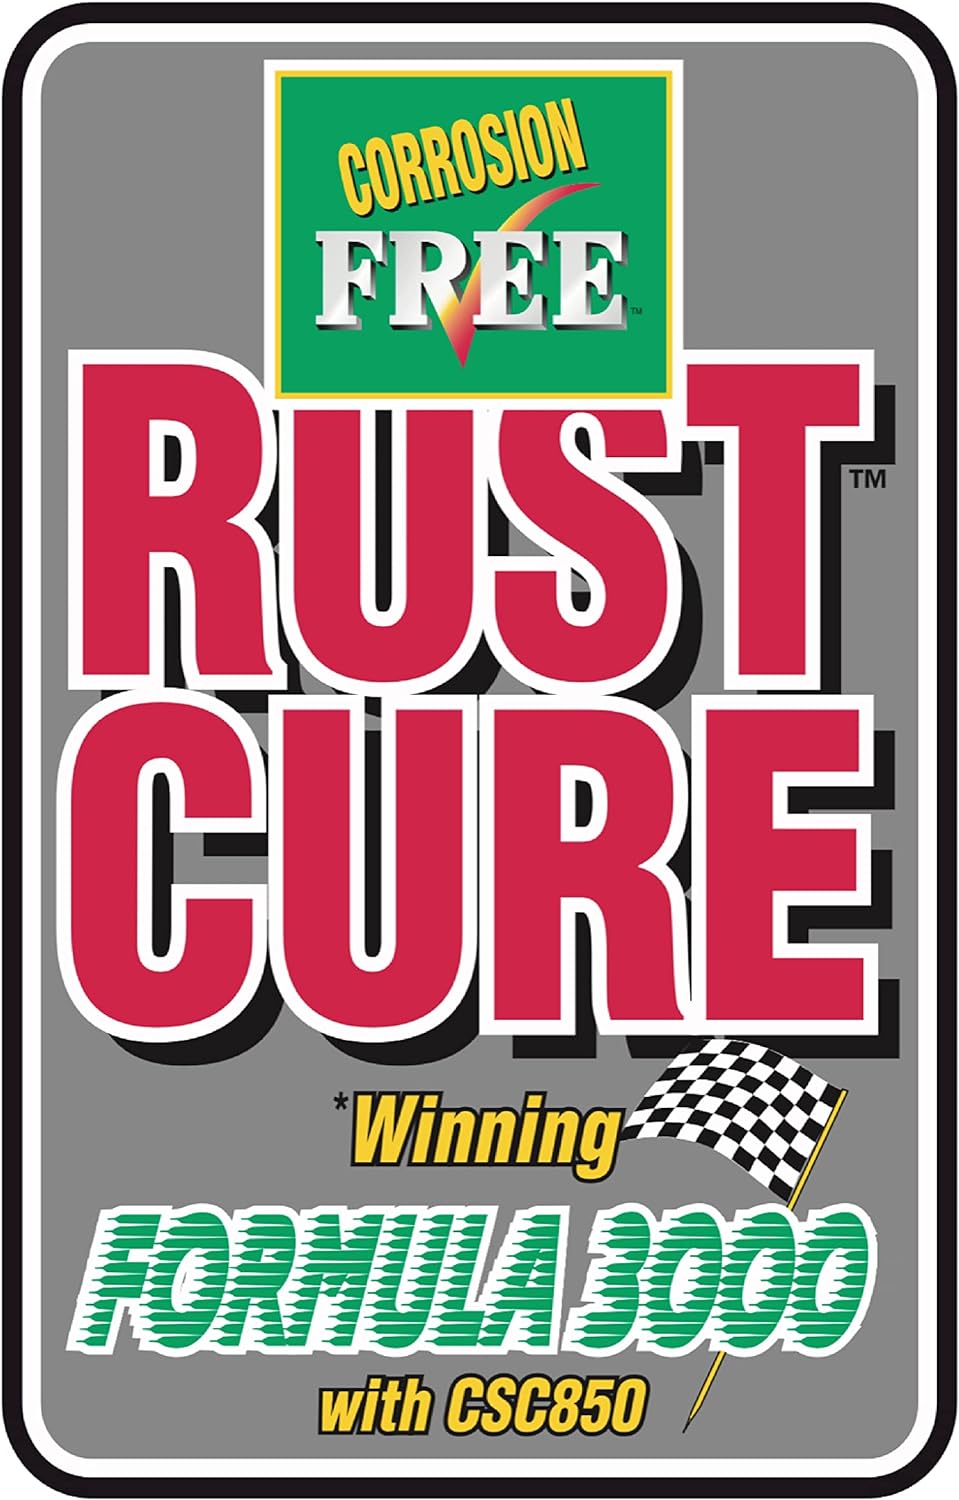 Corrosion Free Rust Cure Formula 3000 1G/4L Jug, Great for Vehicles, Buses, Tractors, snowblowers, mowers, Rust Prevention, Rust Inhibitor, un